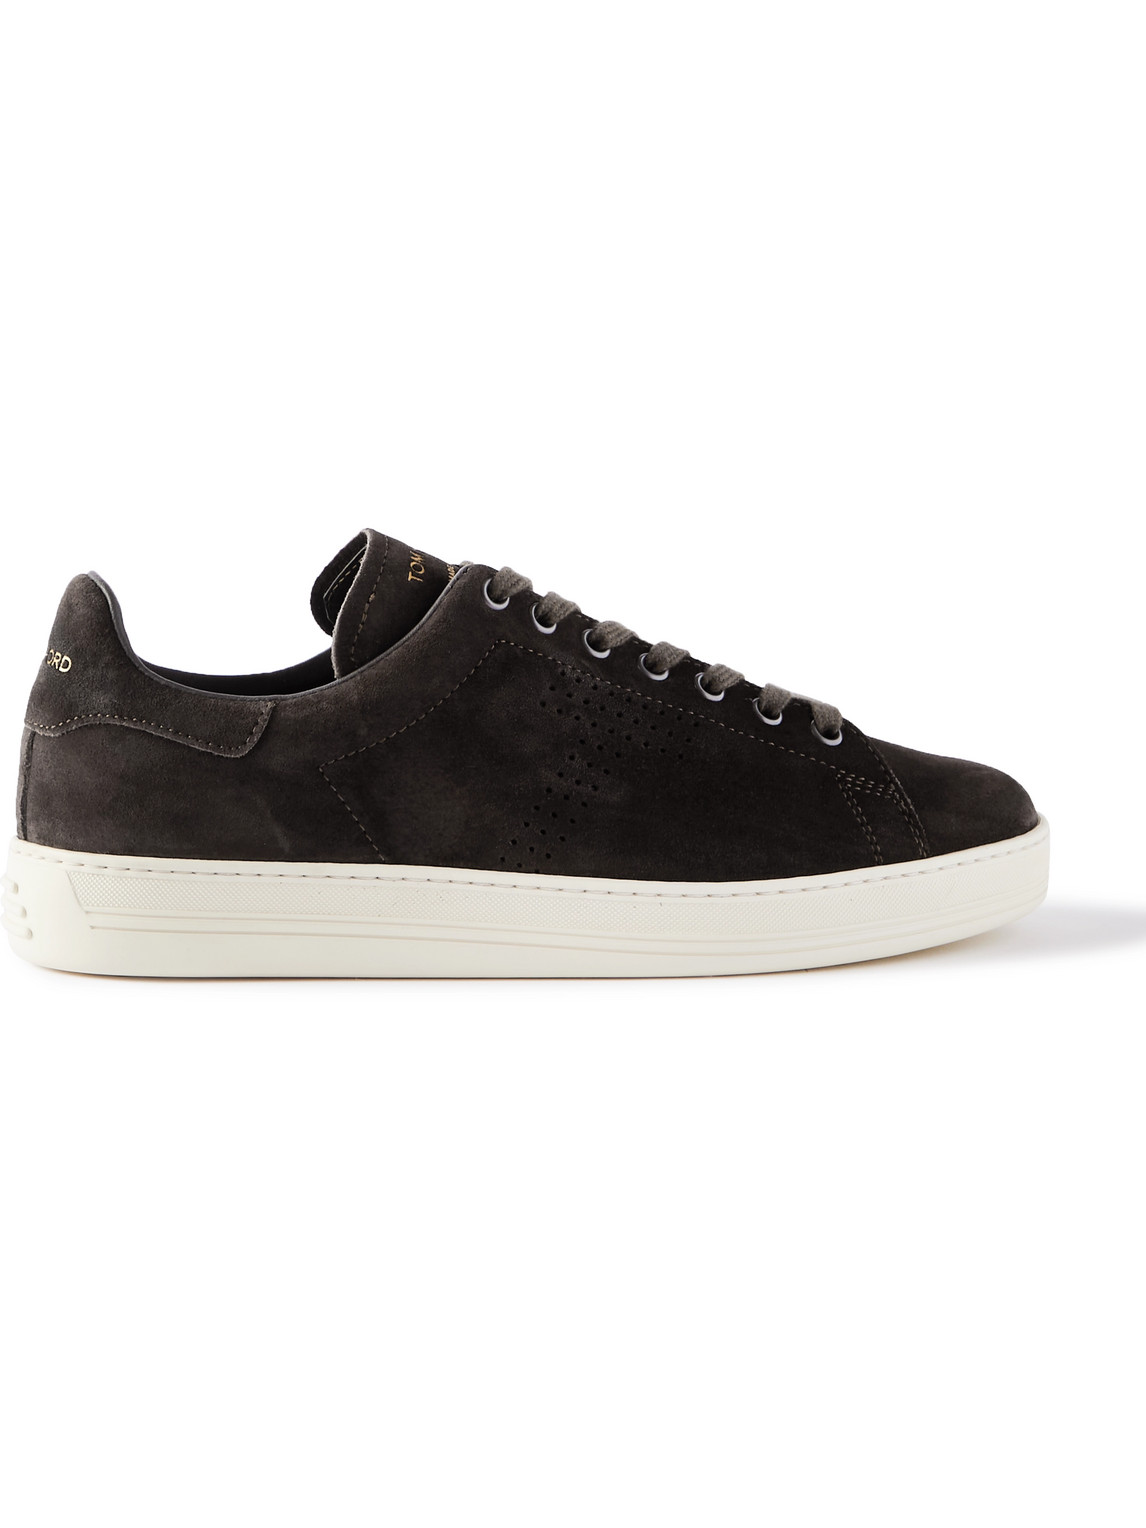 Warwick Perforated Suede Sneakers